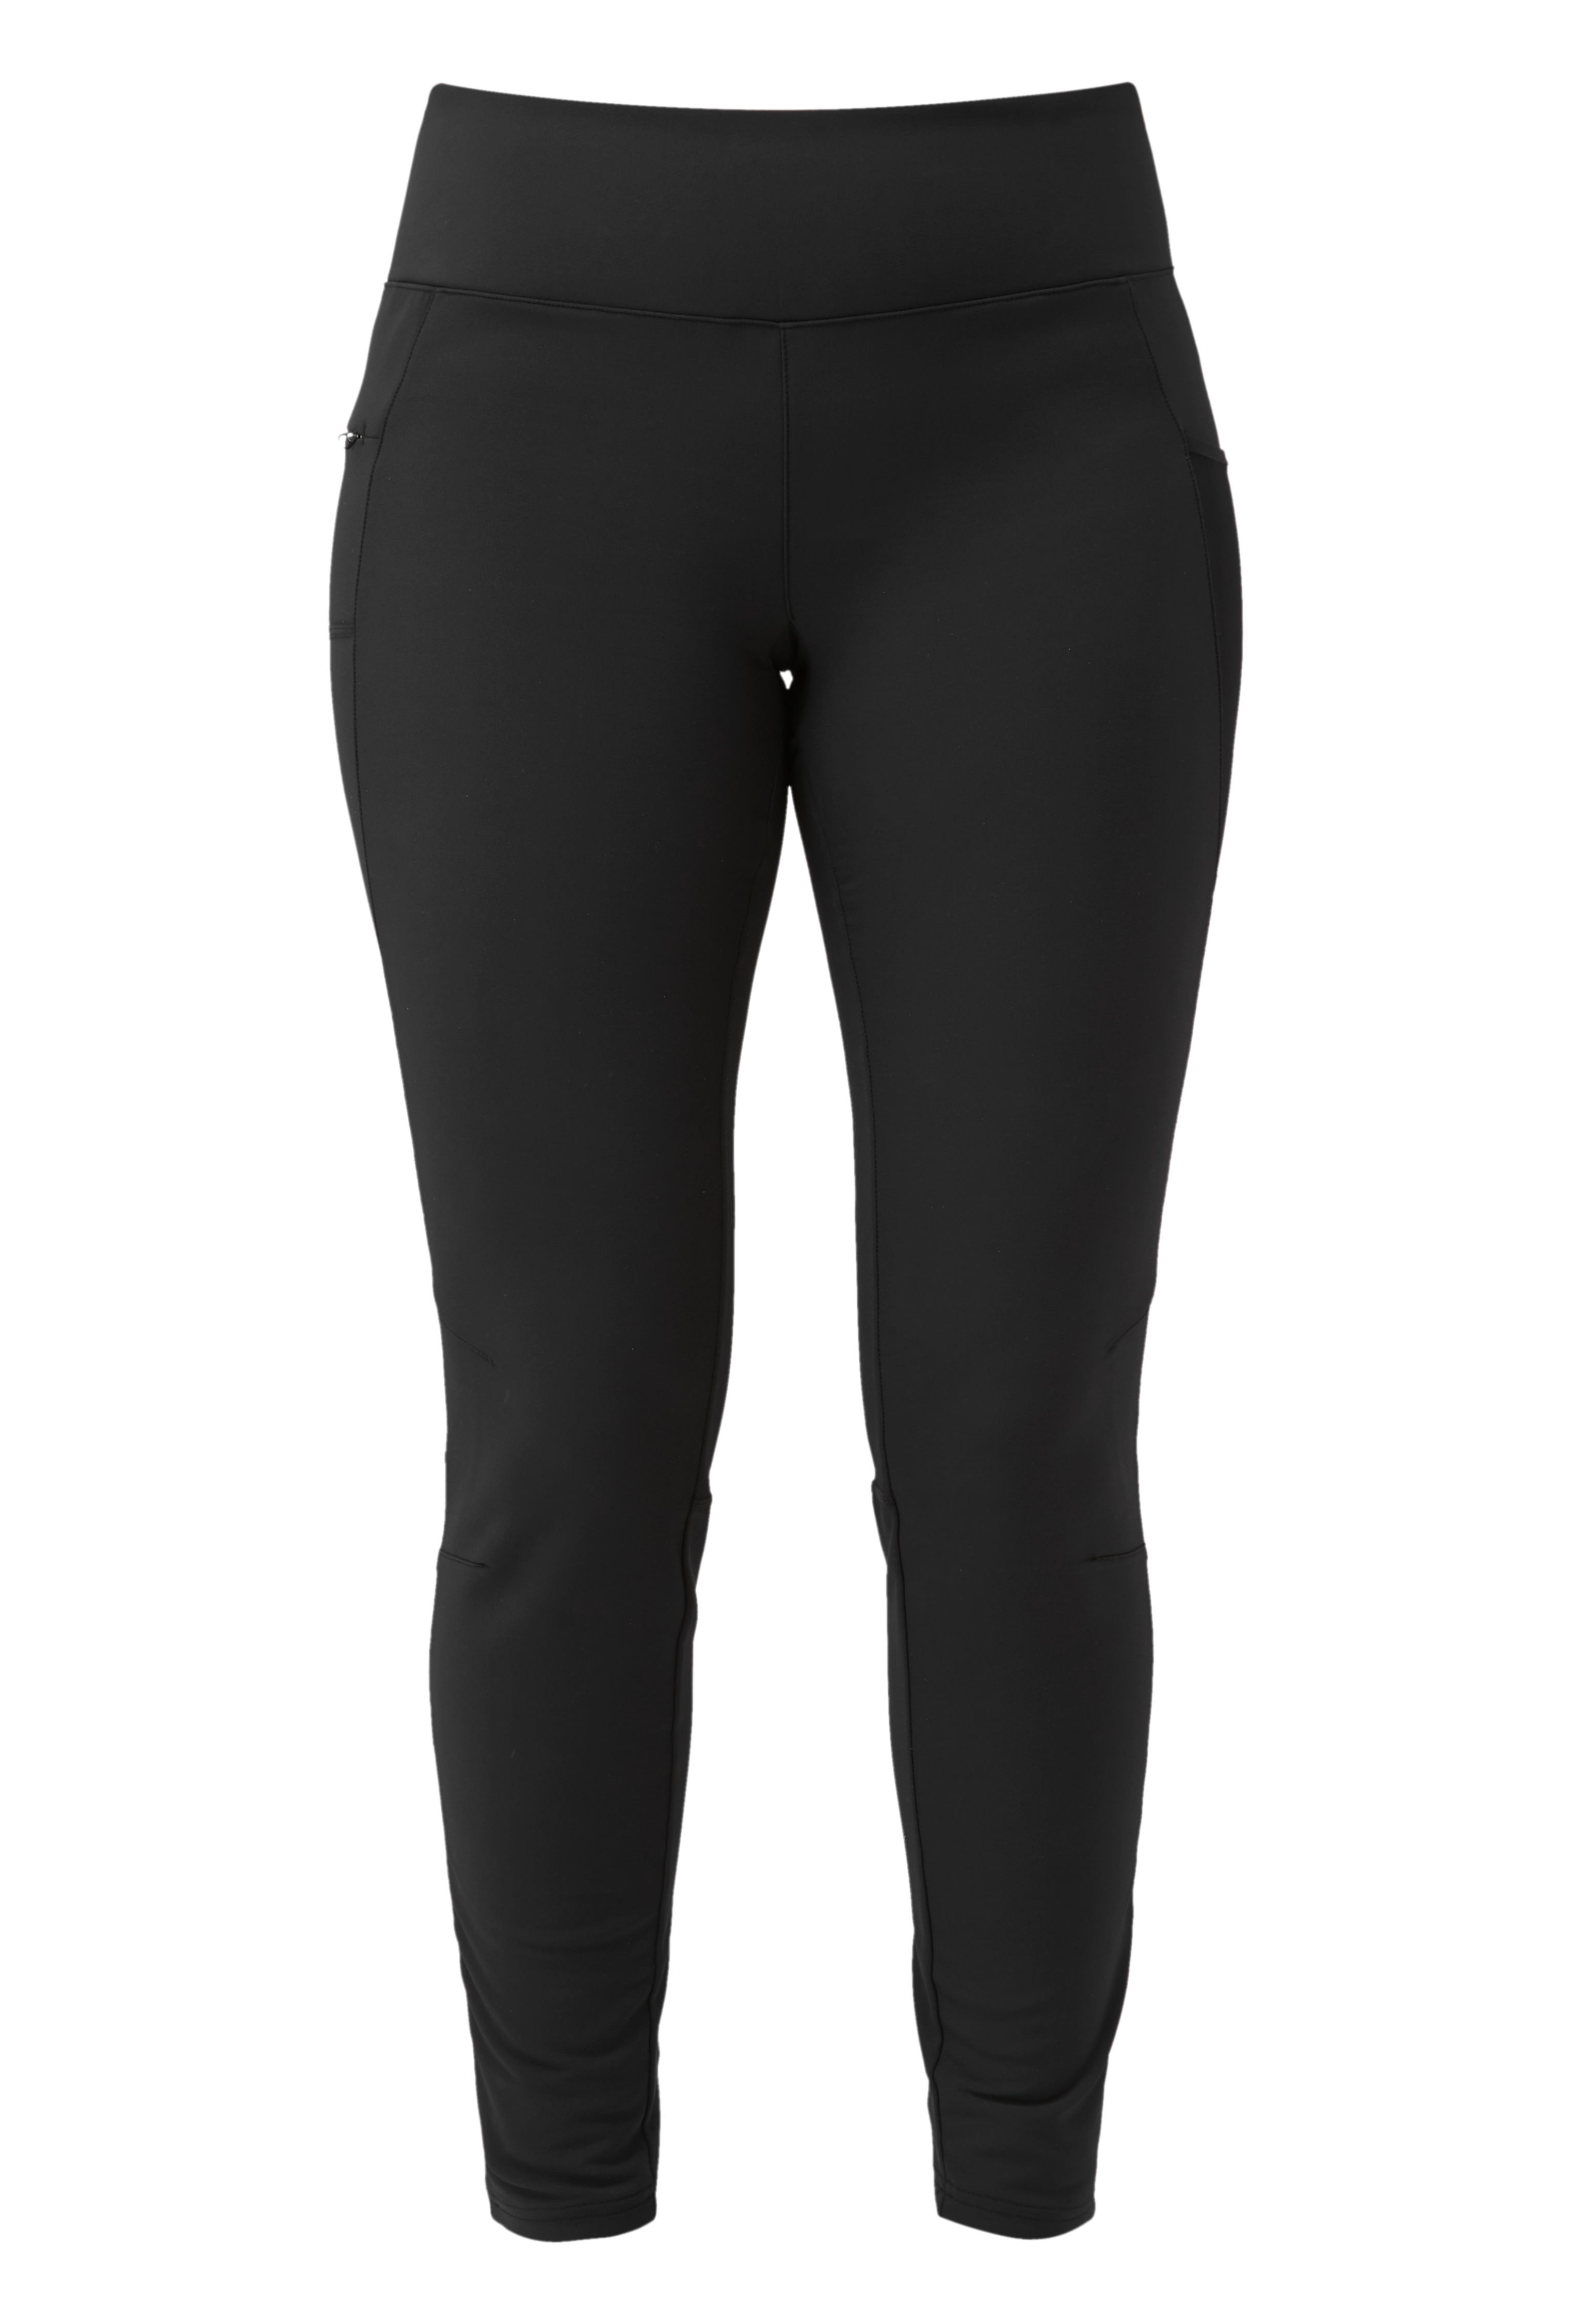 Sonica Womens Tight [ME-004196_SAMPLE]